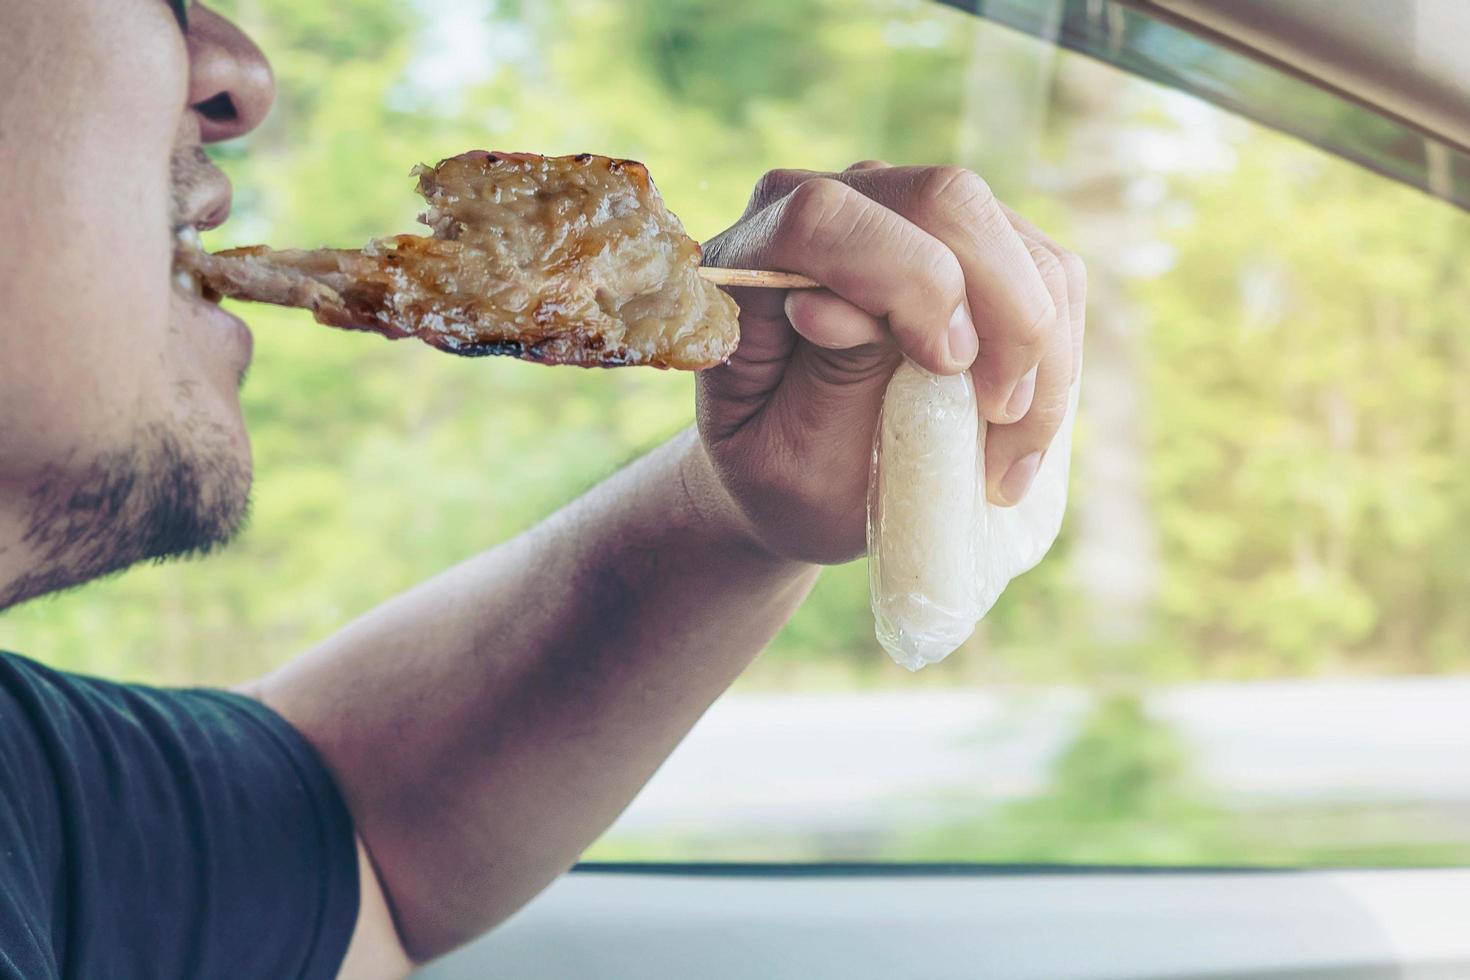 Man driving car while eating grilled  pork stick with sharp spike bamboo stick and sticky rice in plastic pack dangerously - multitasking driving bad behave danger risk drive concept photo